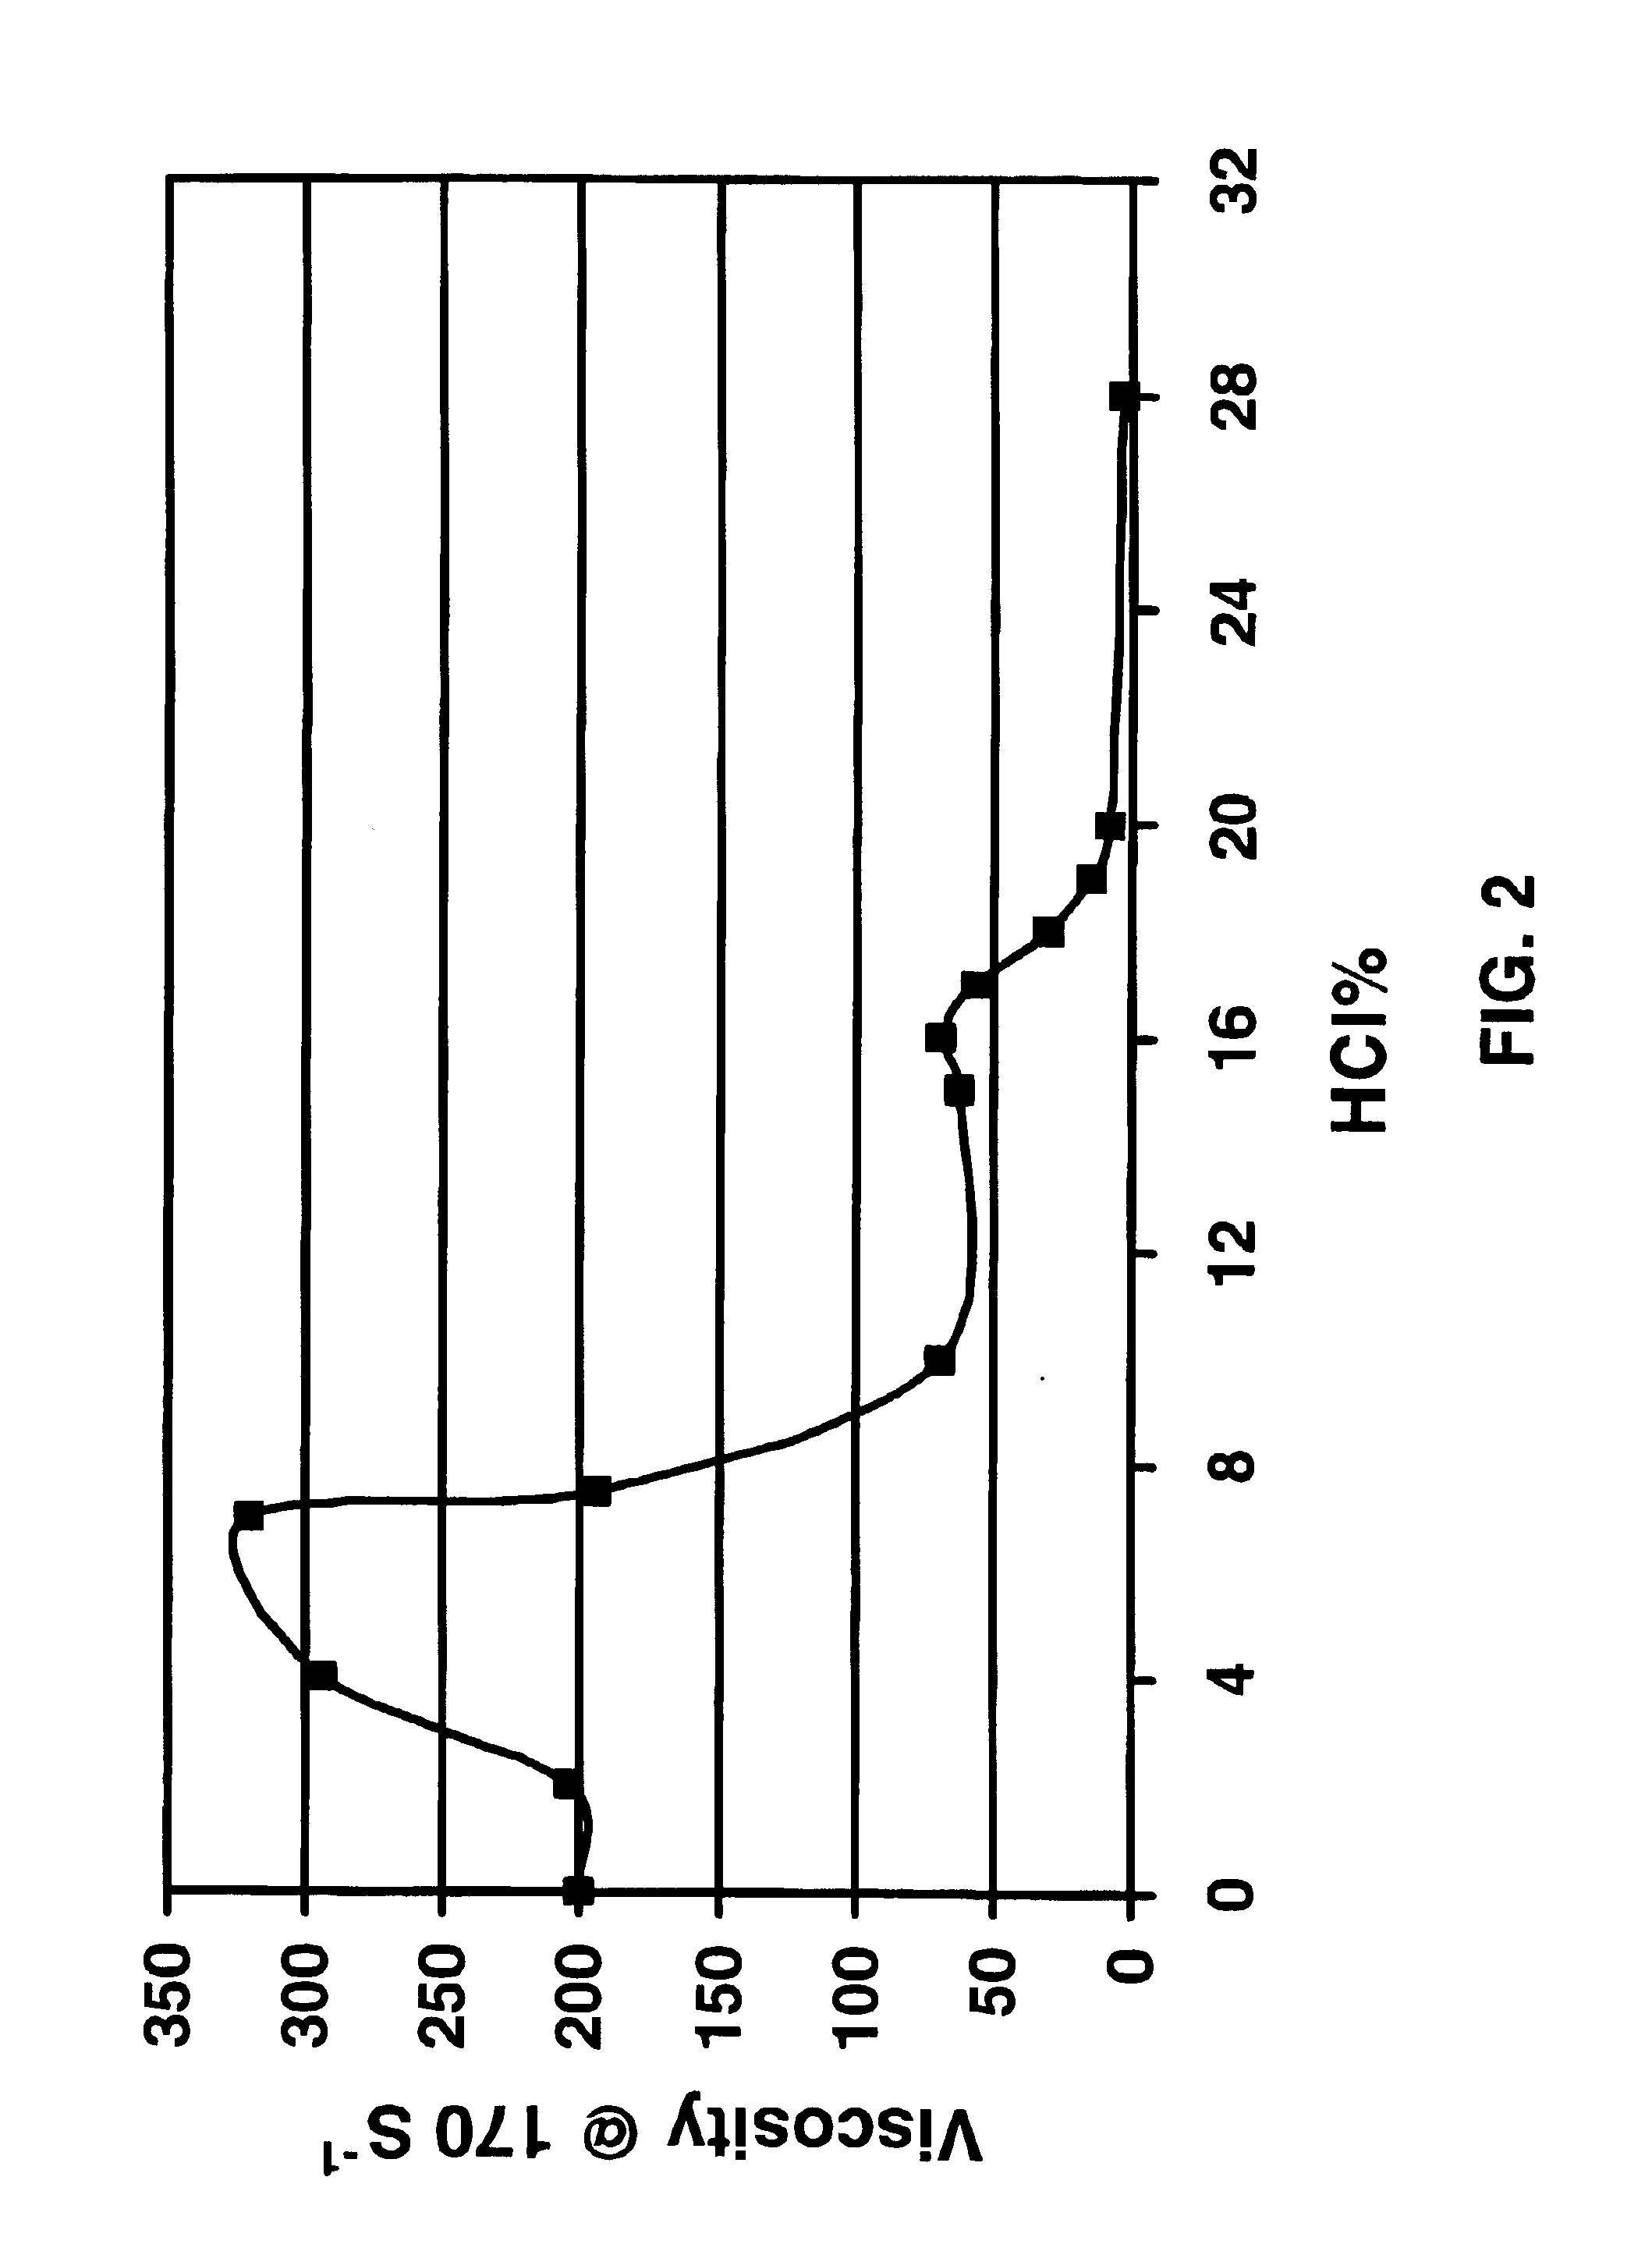 Compositions and methods for treating a subterranean formation